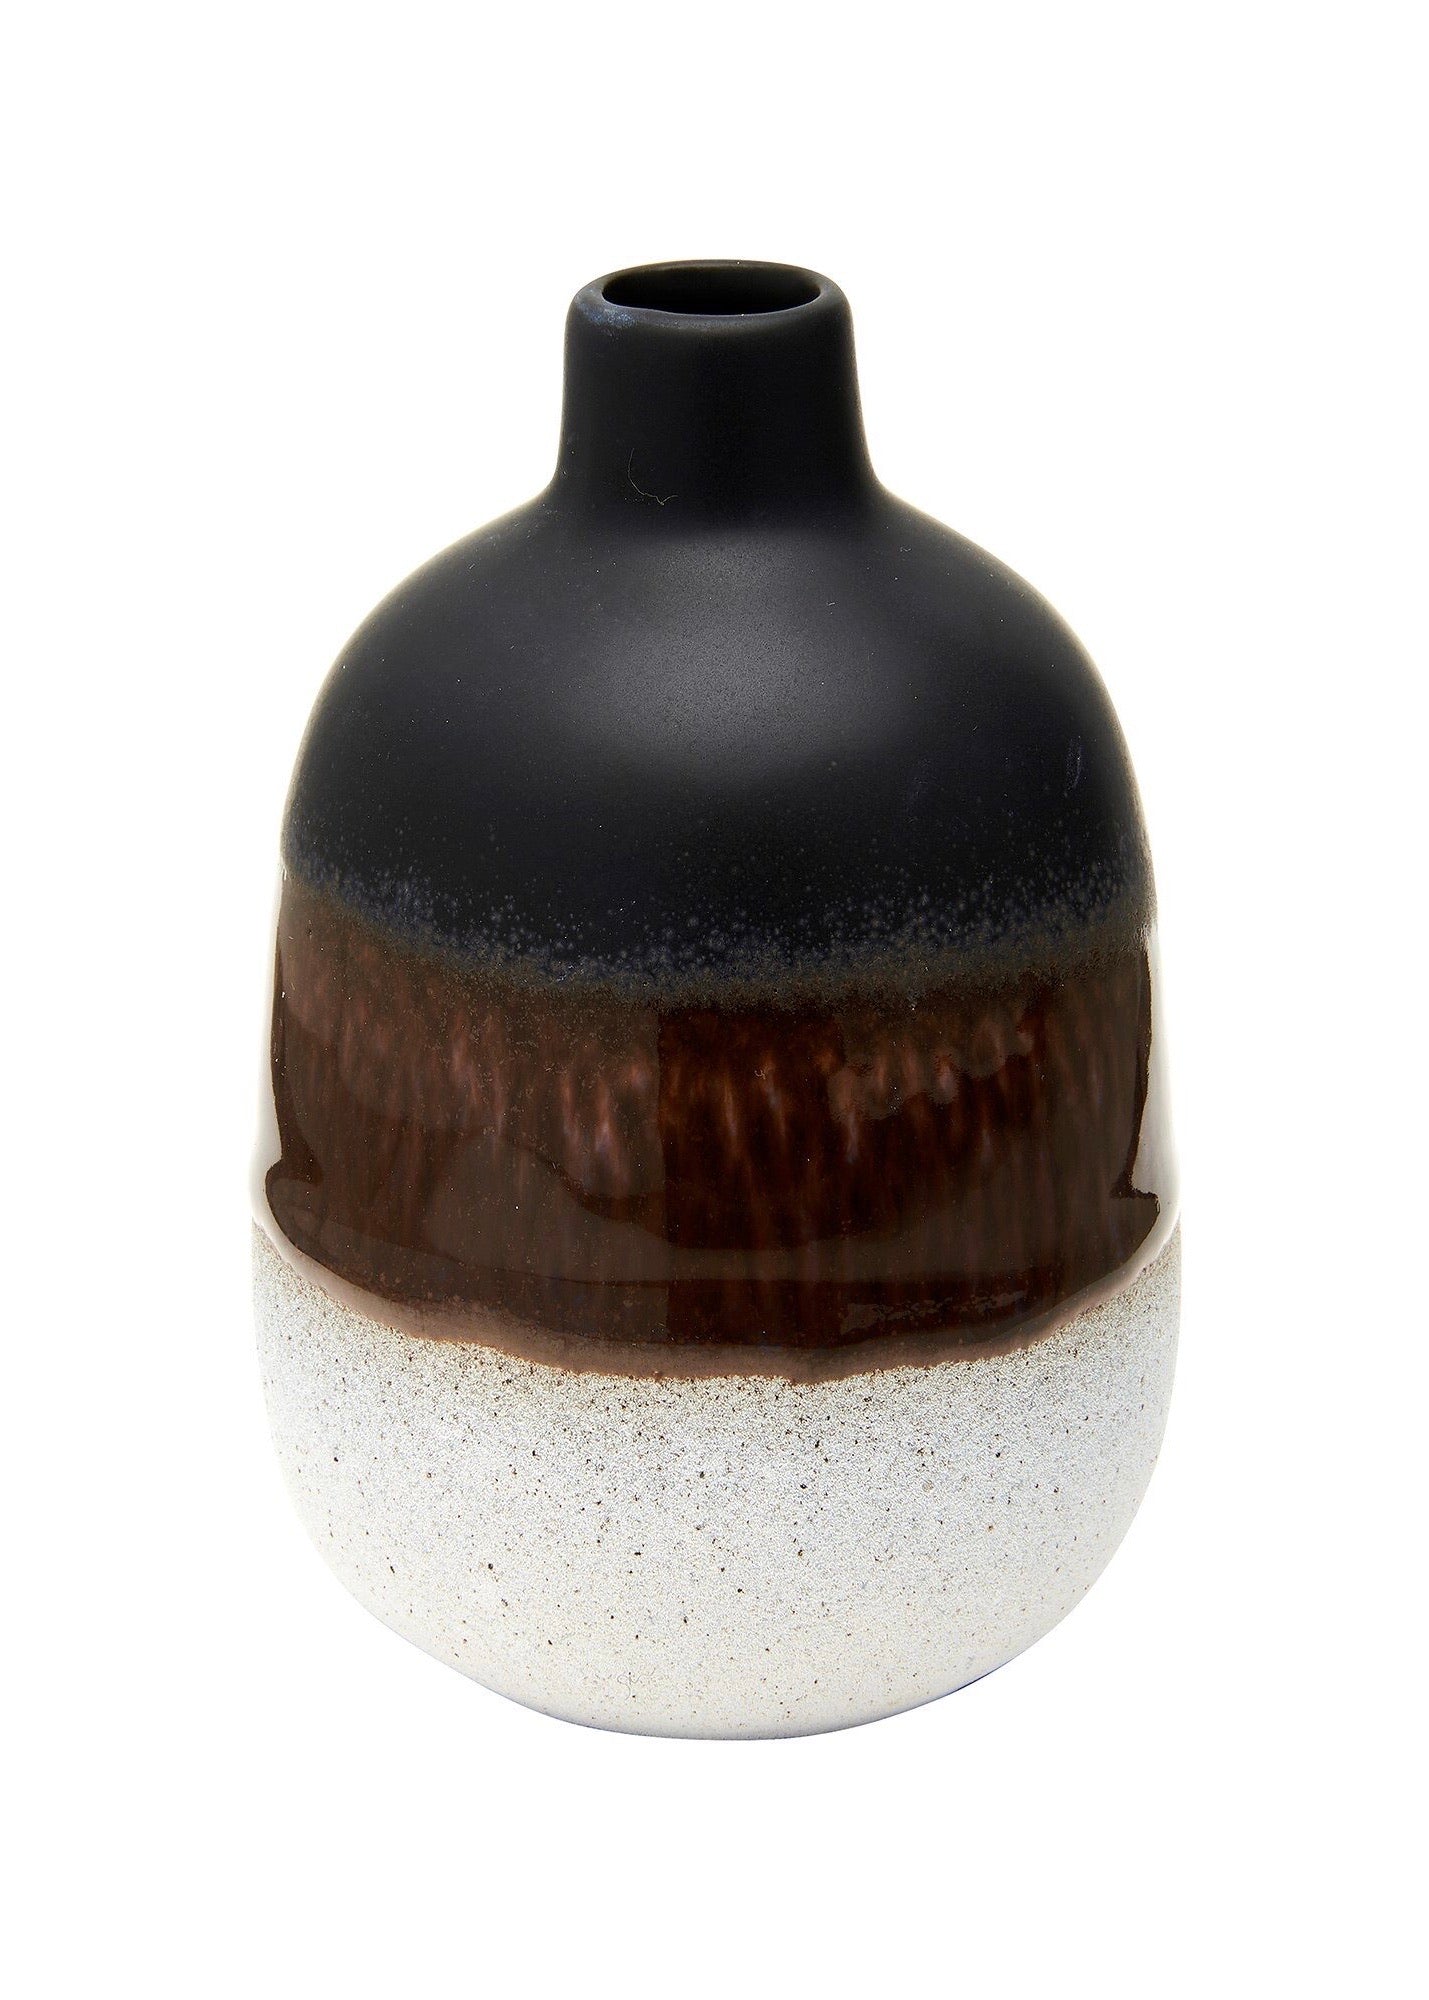 Half dipped glazed vase with rustic textured bottom in black